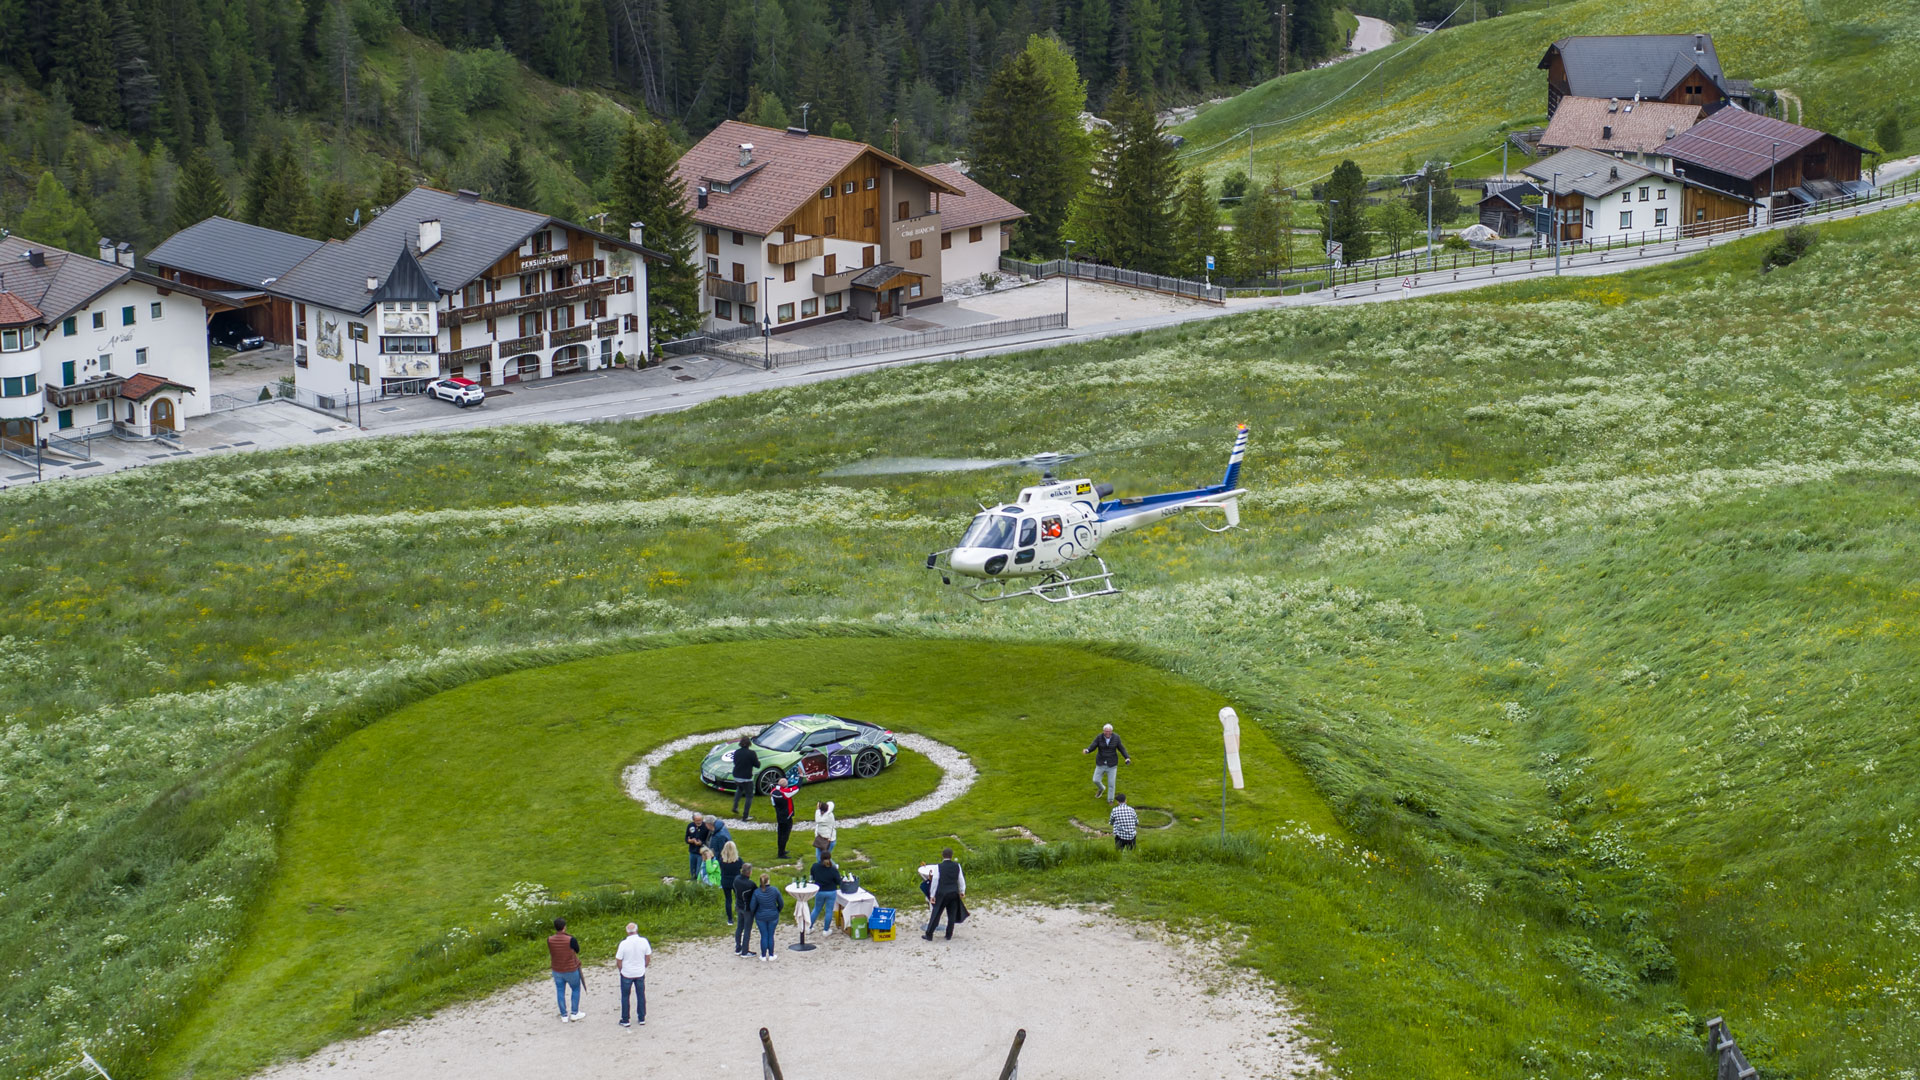 Helicopter in the dolomites